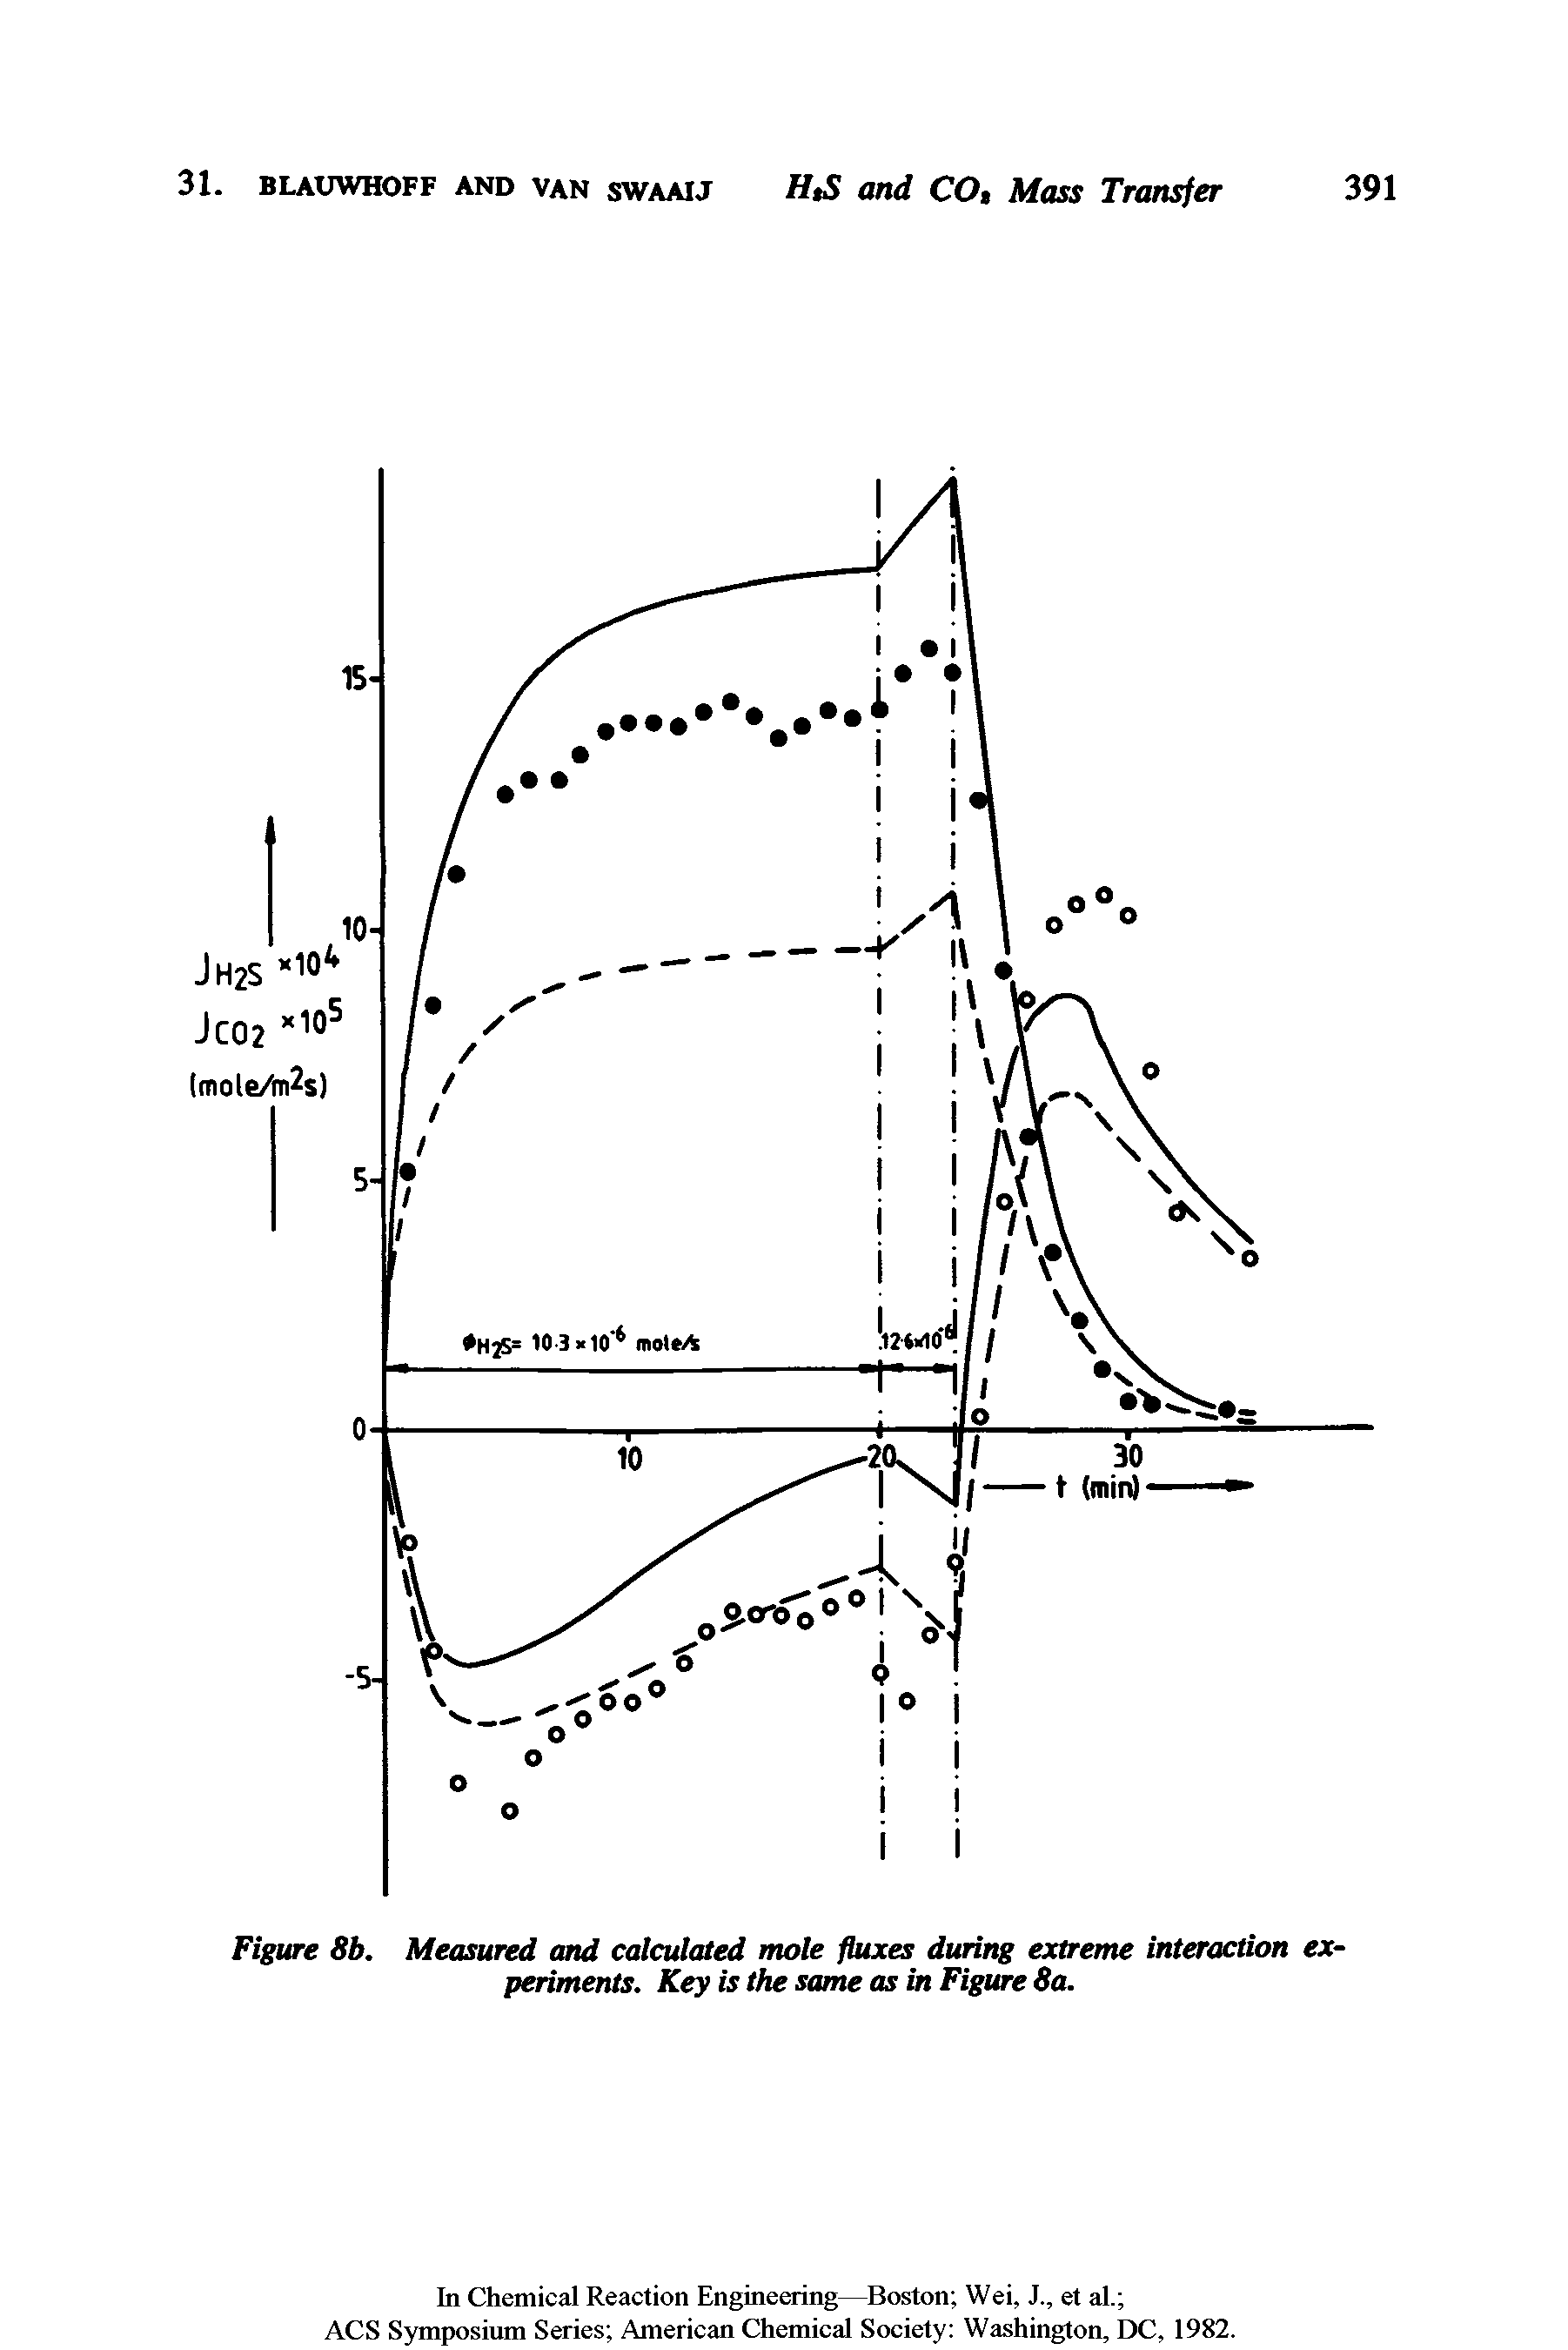 Figure 8b. Measured and calculated mole fluxes during extreme interaction experiments. Key is the same as in Figure 8a.